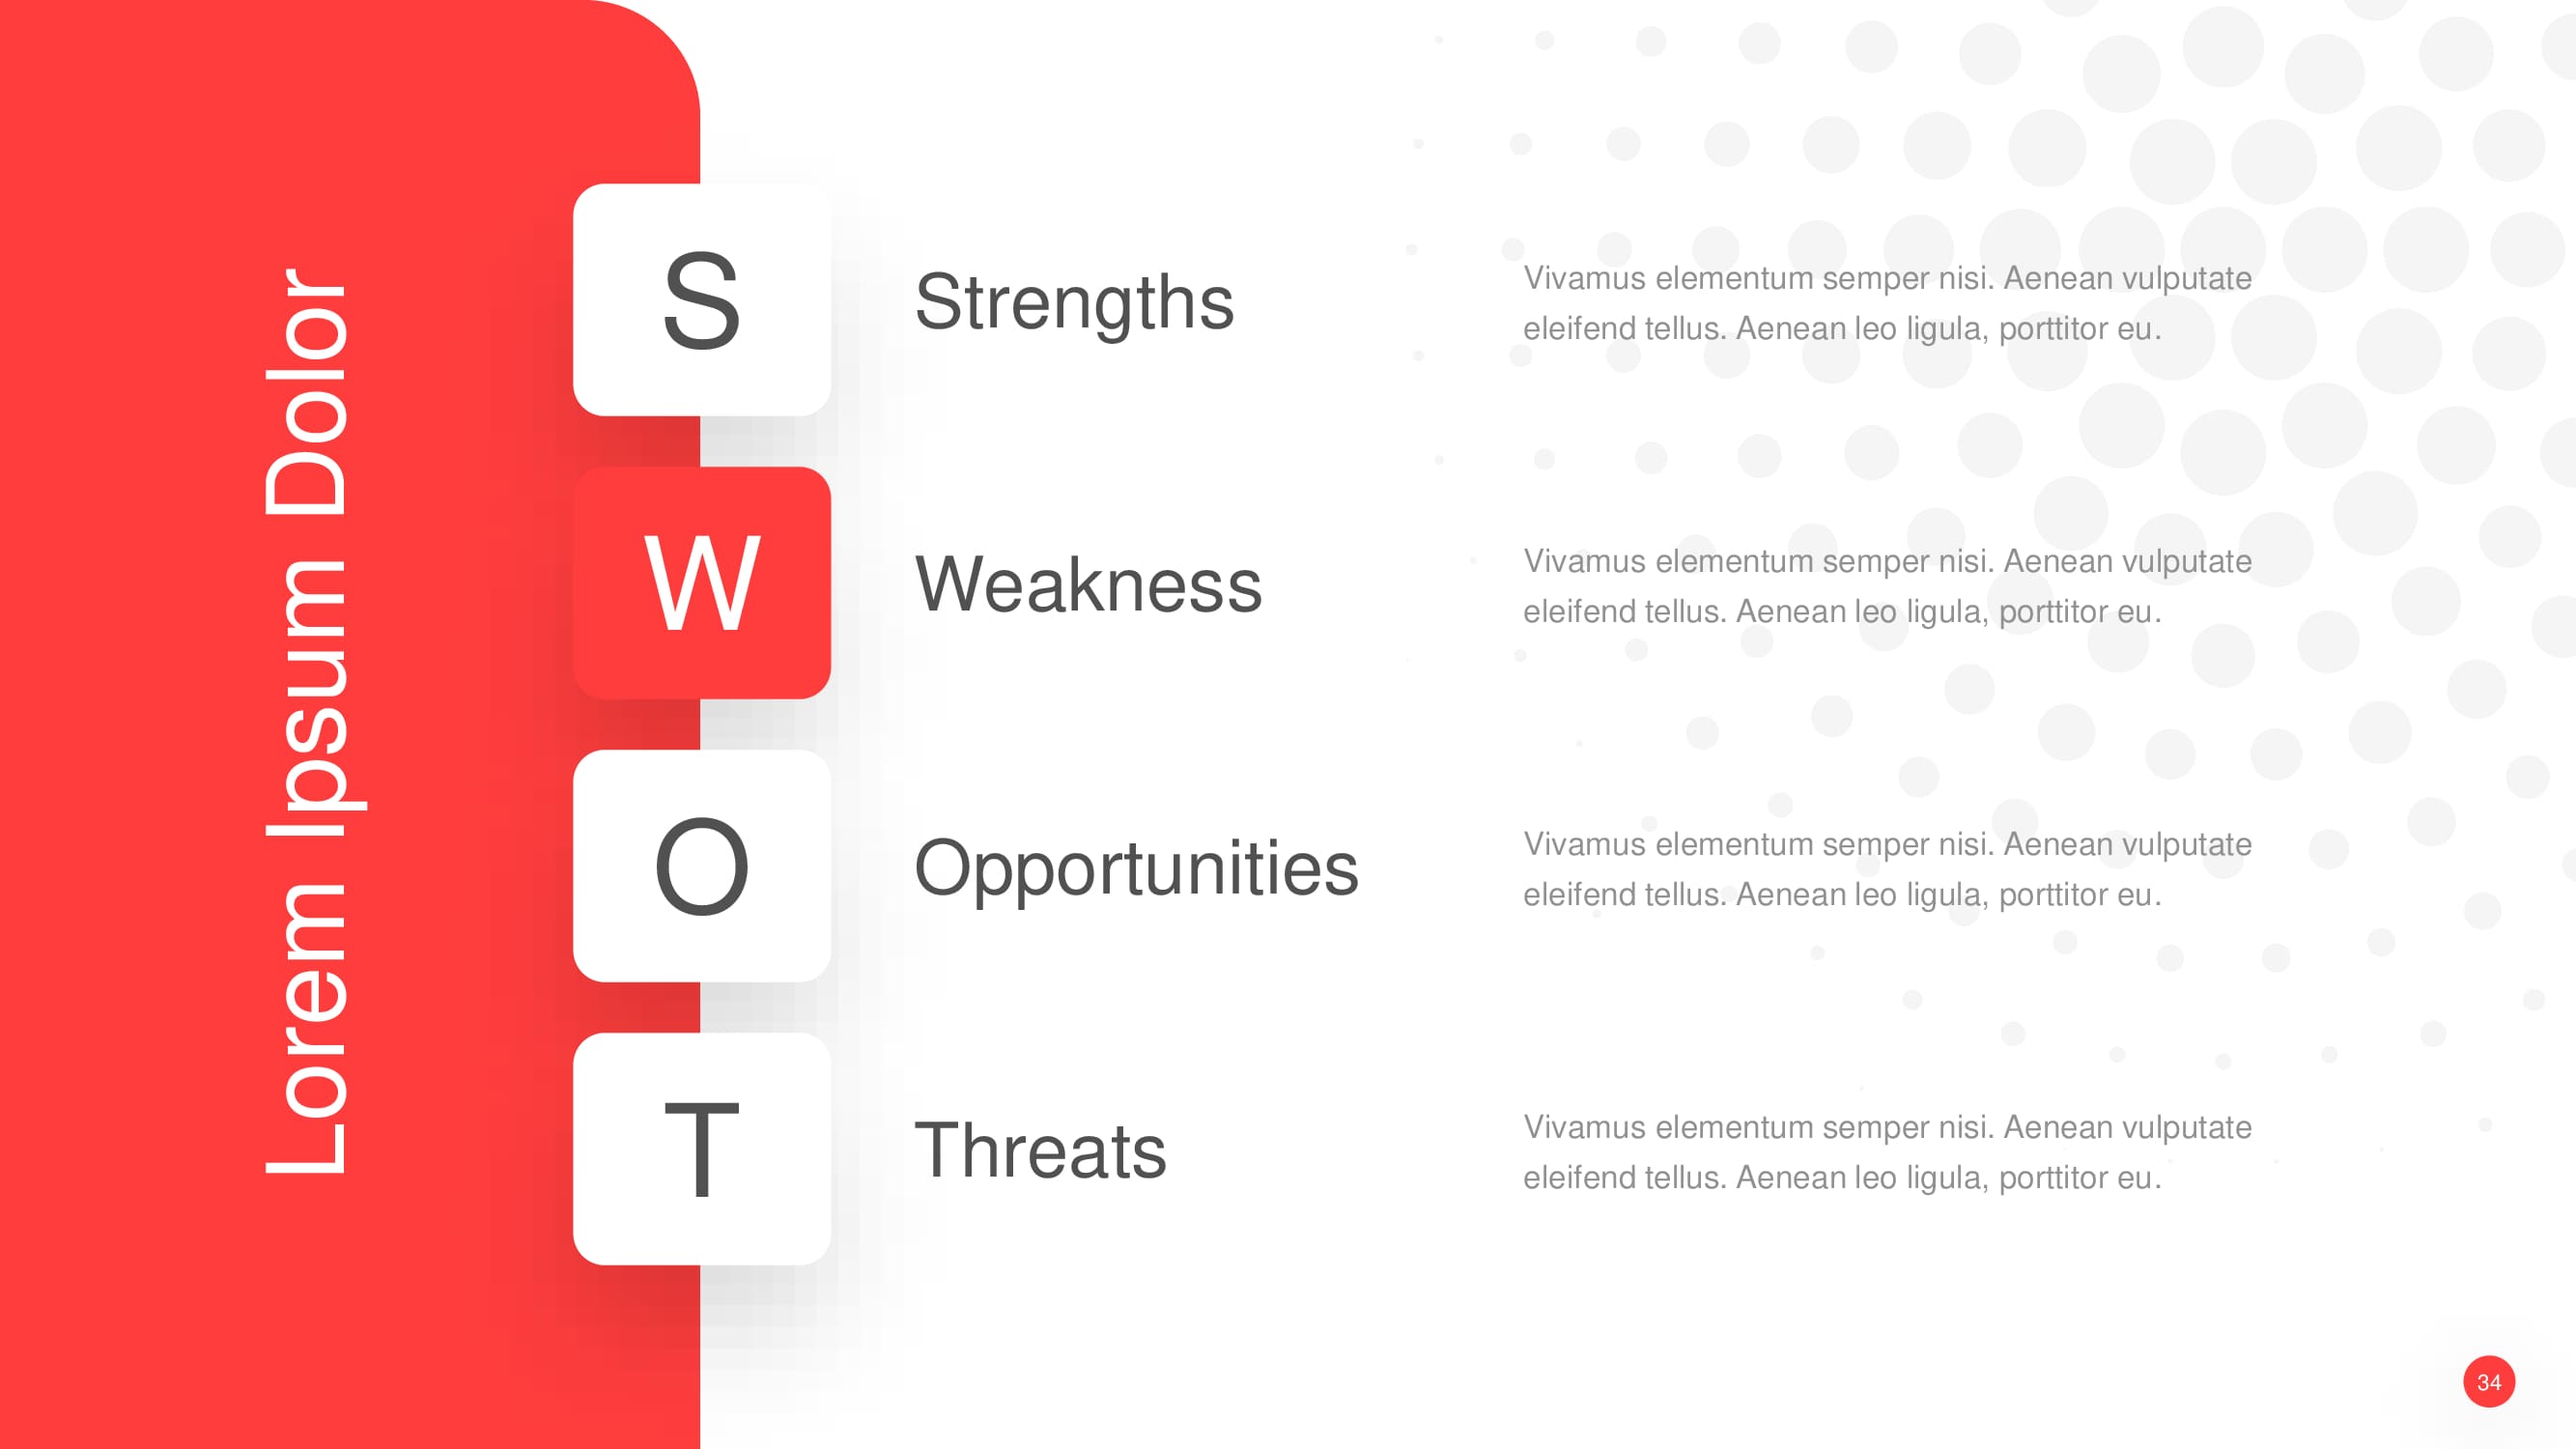 Minimalistic SWOT analysis slide in red and white colors.